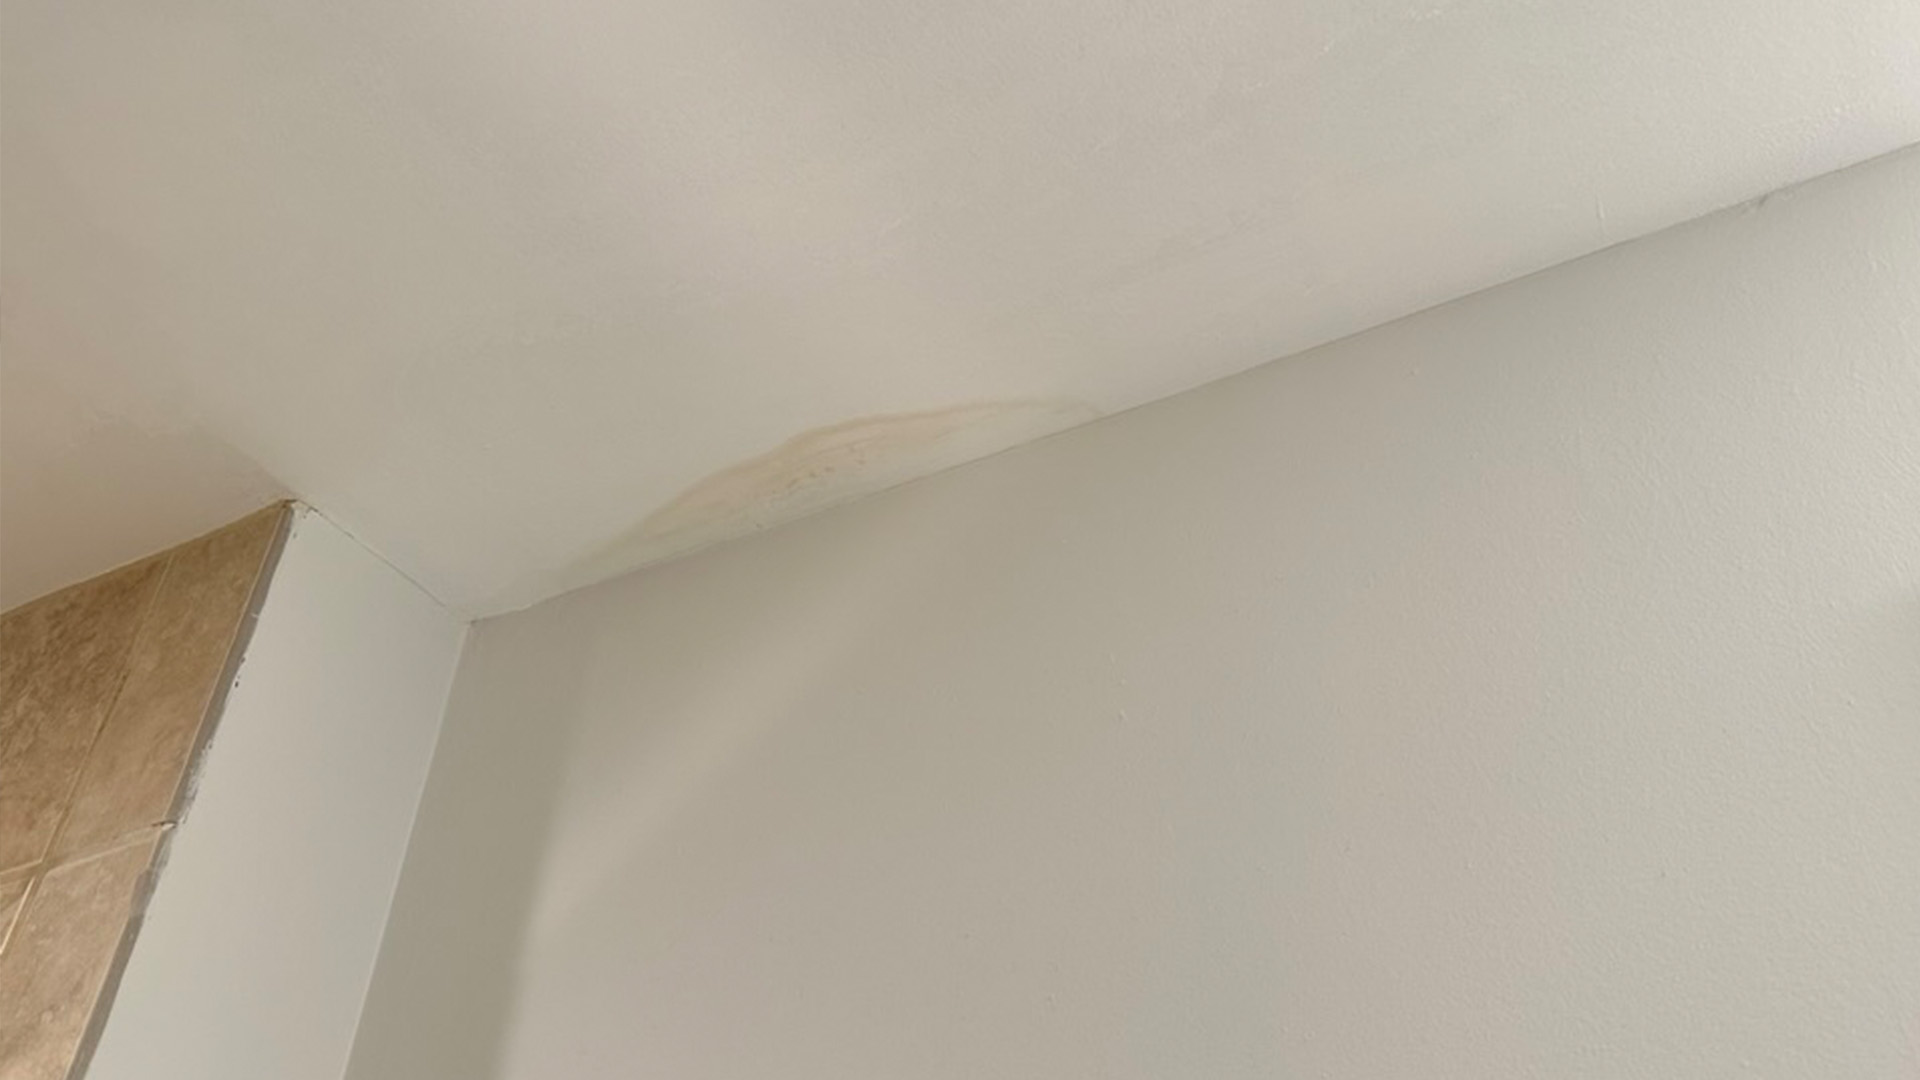 Ceiling water spot from roof damage